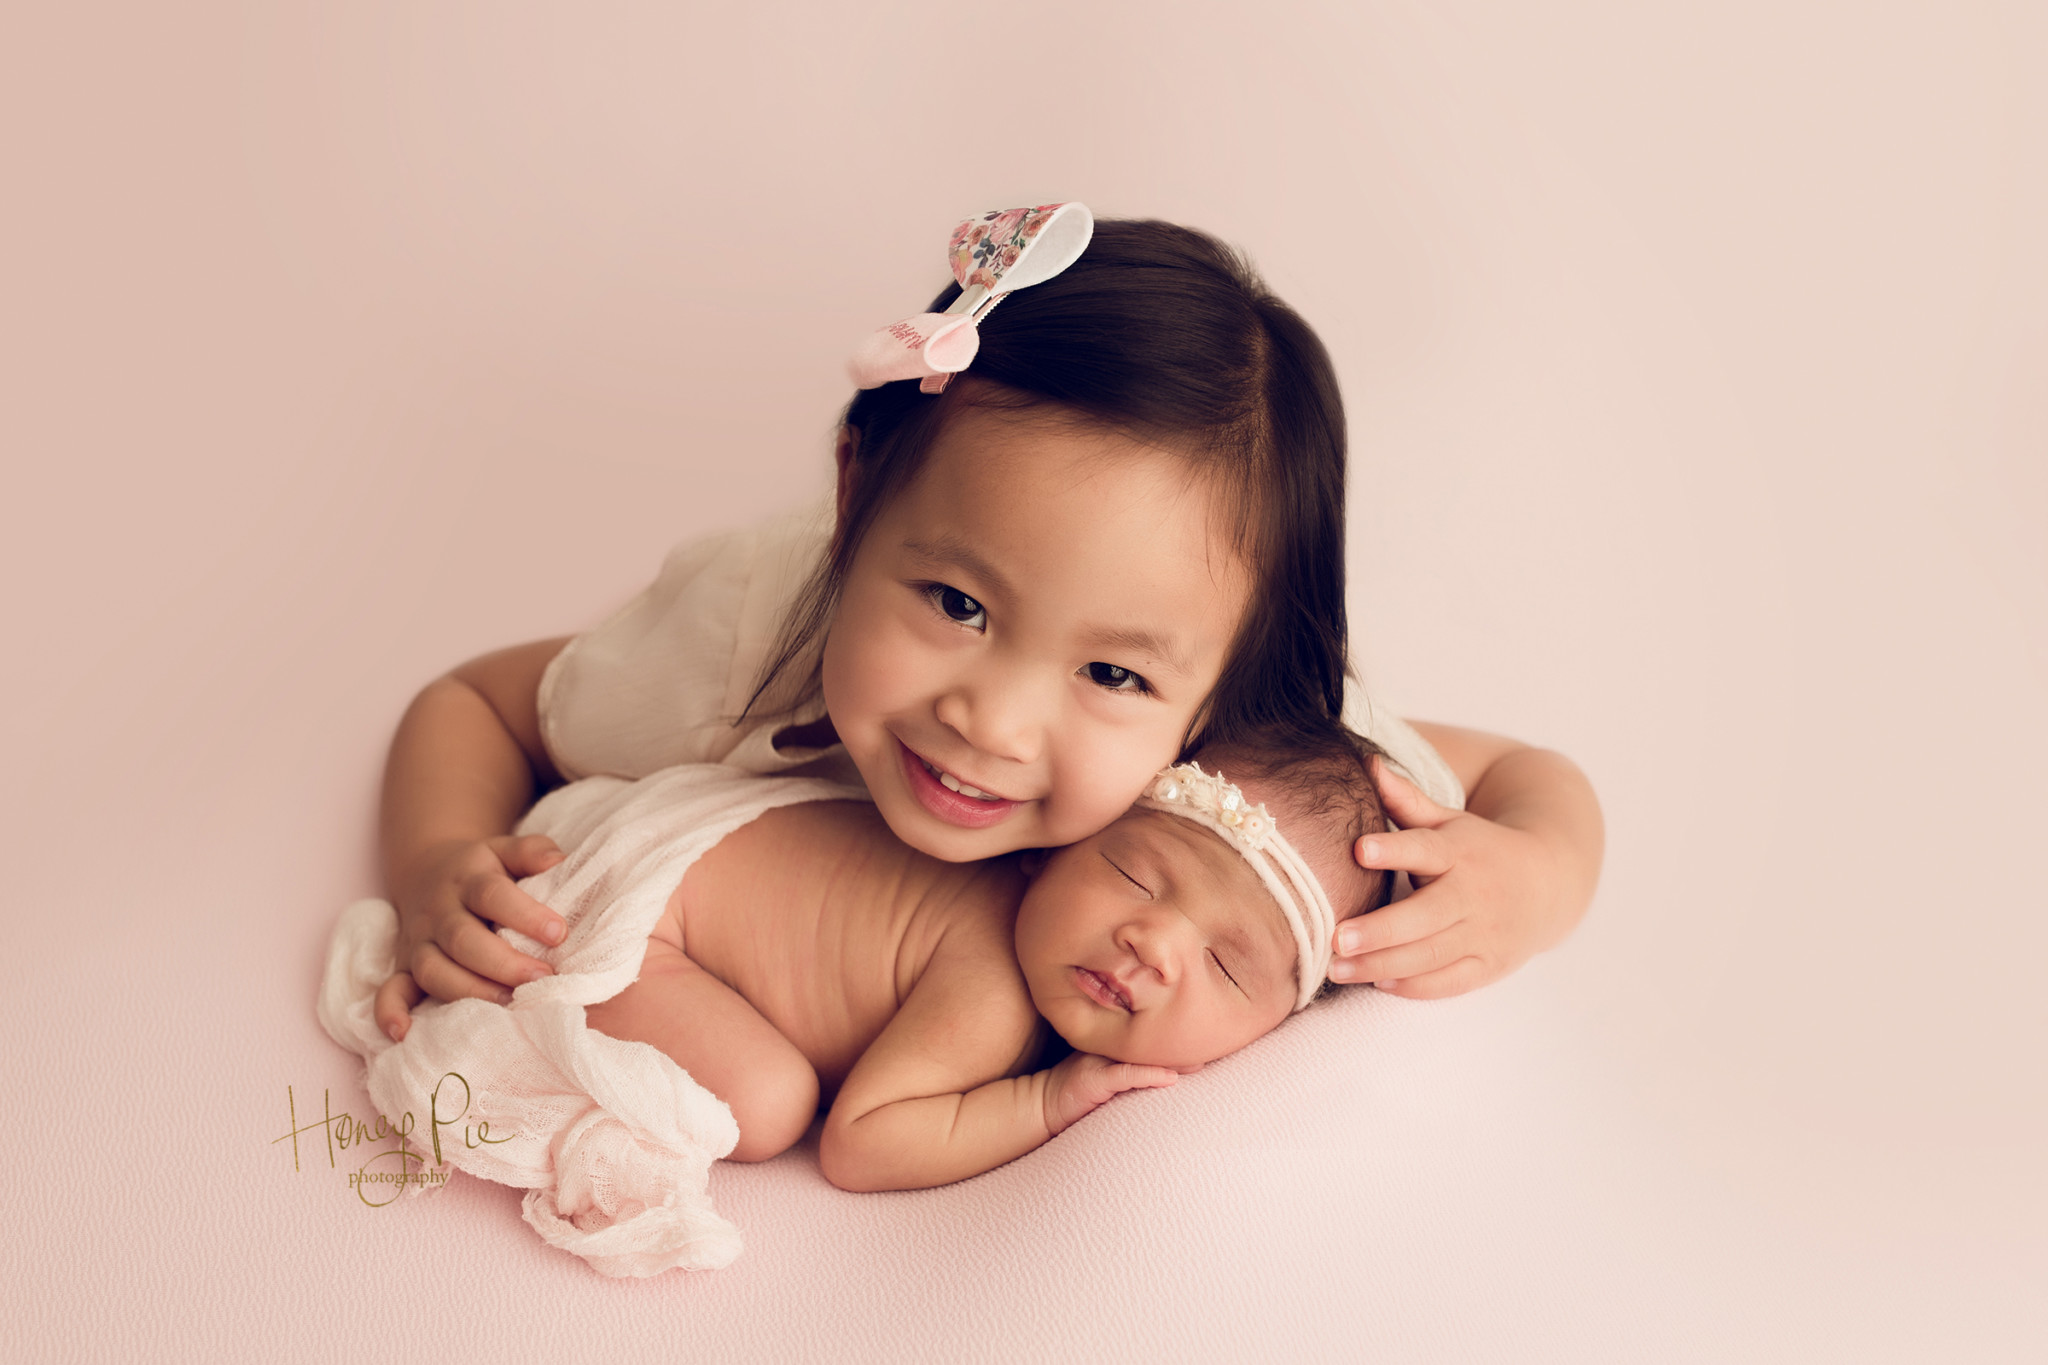 Sibling love with big sister & her newborn baby sister during Worthing Photographer photoshoot